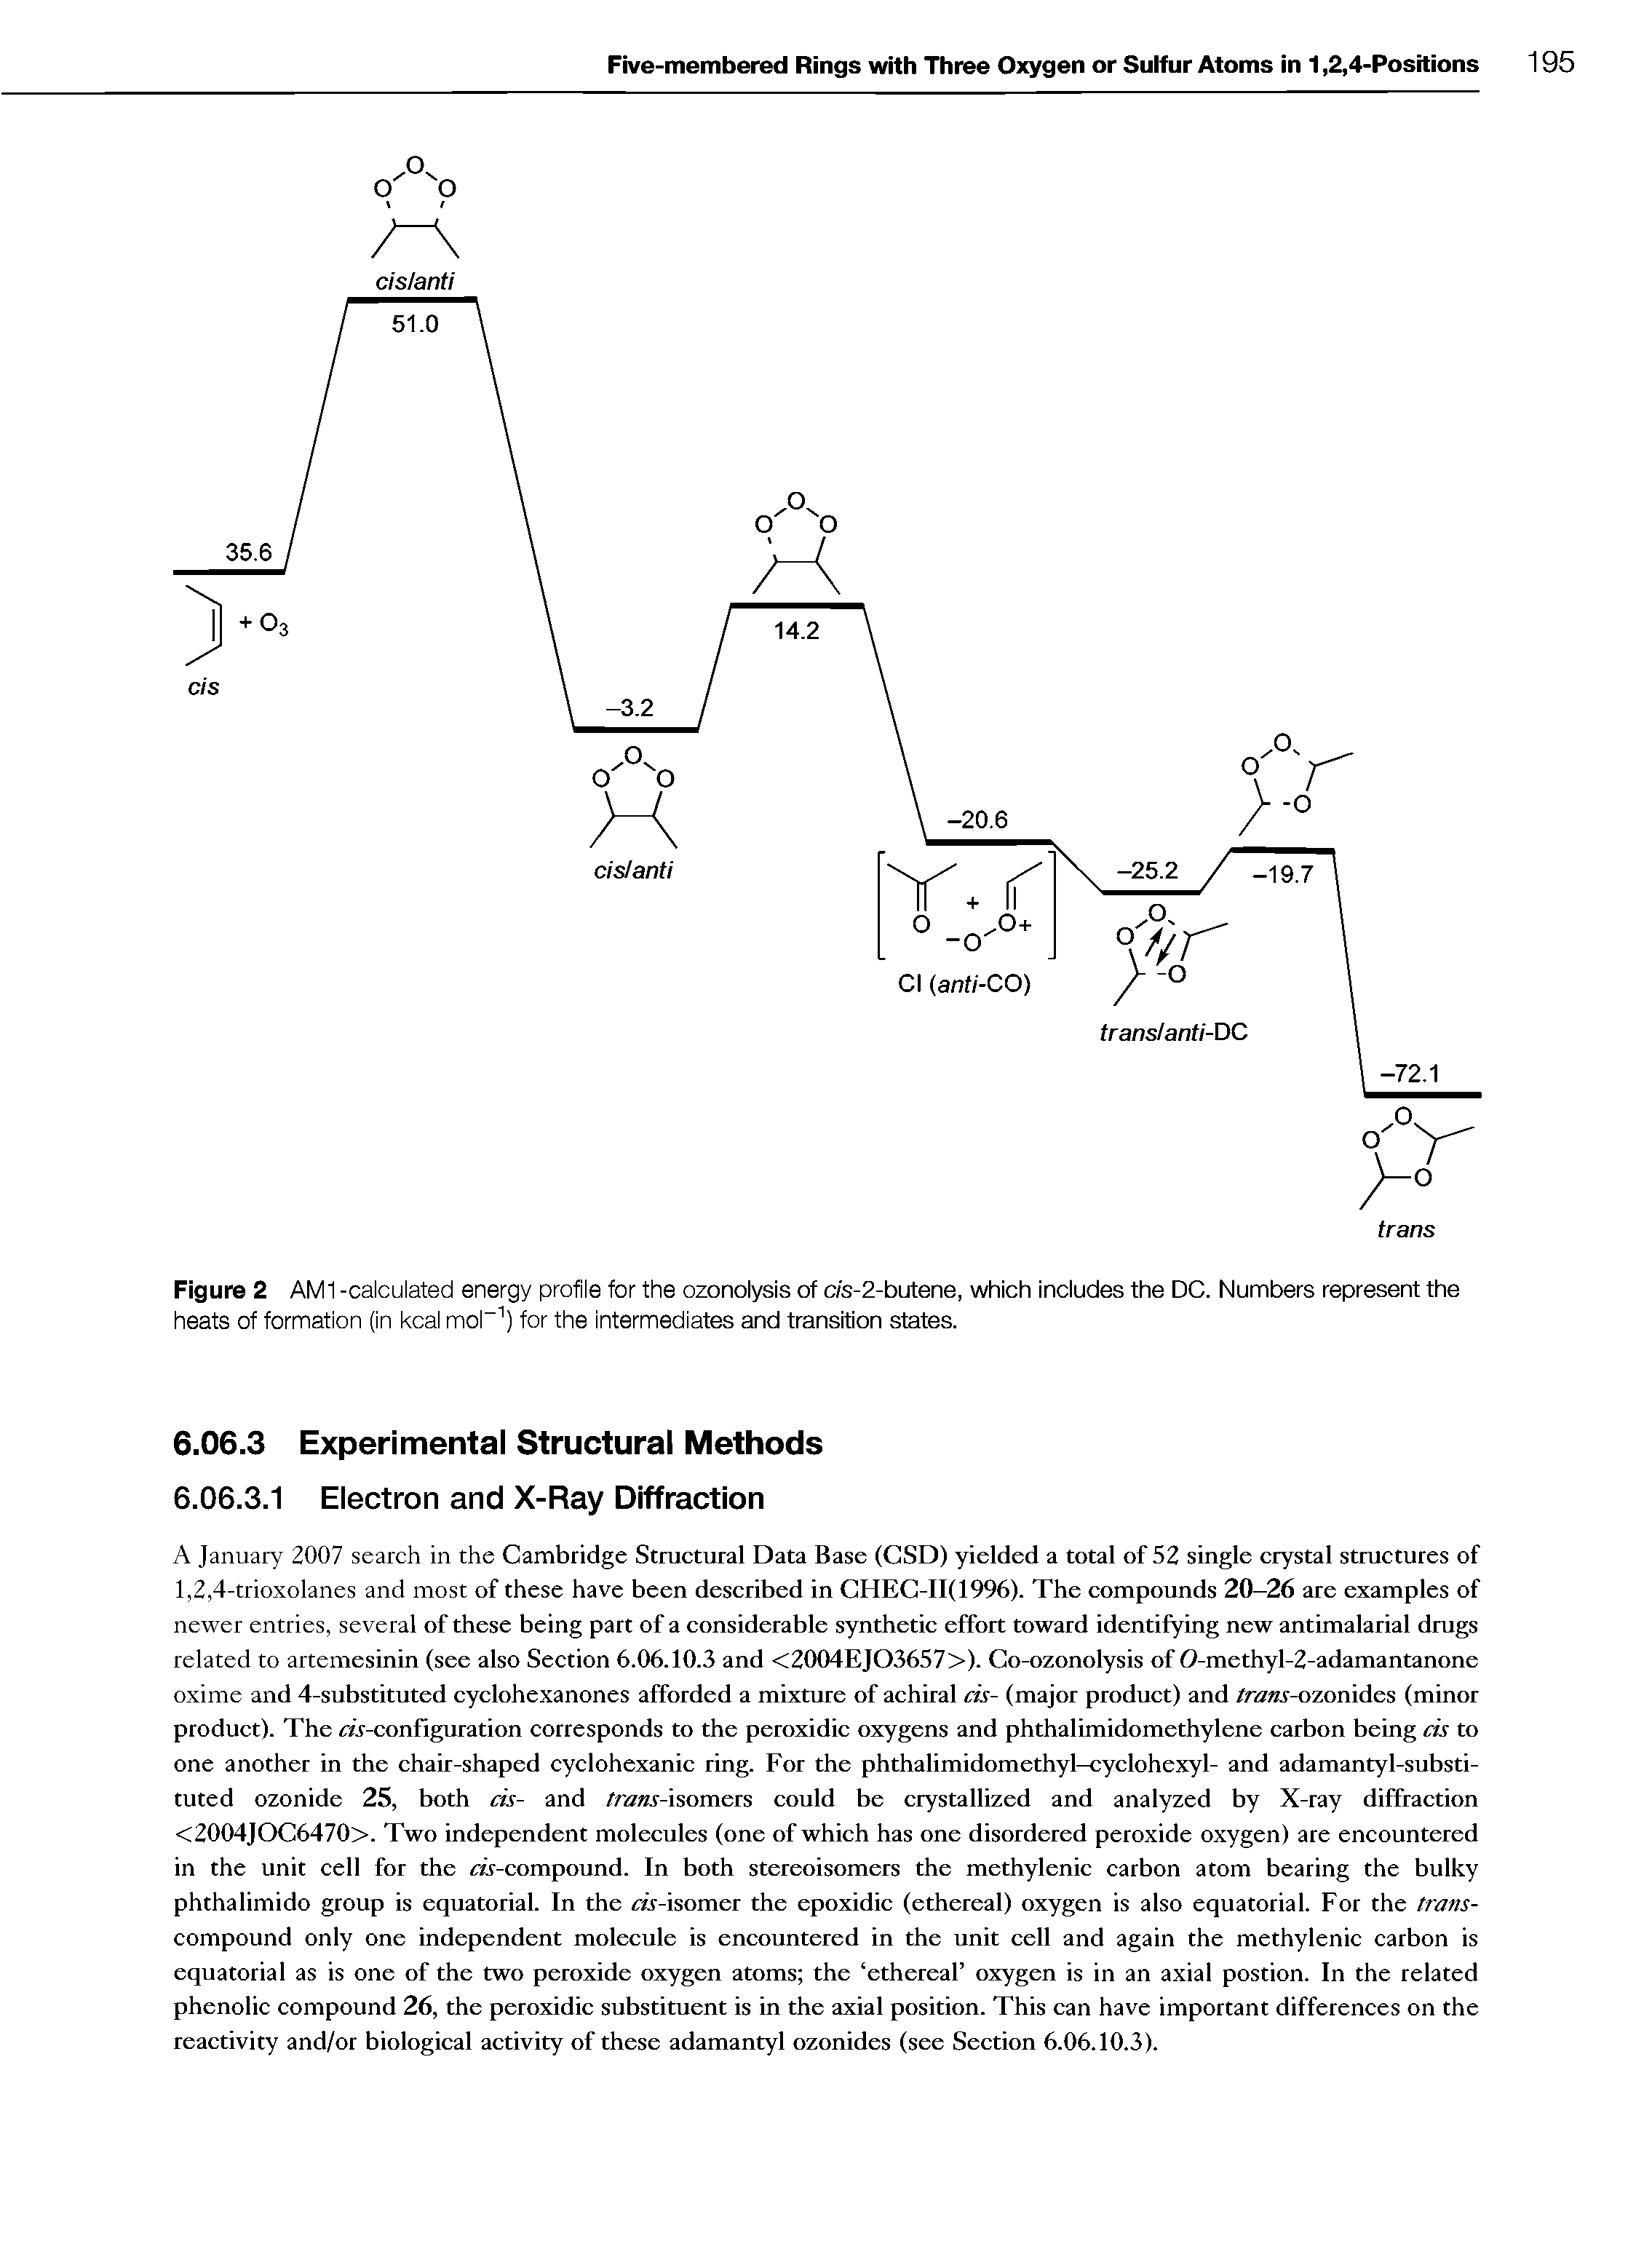 Figure 2 AM 1 -calculated energy profile for the ozonolysis of c/s-2-butene, which includes the DC. Numbers represent the heats of formation (in kcal mol-1) for the intermediates and transition states.